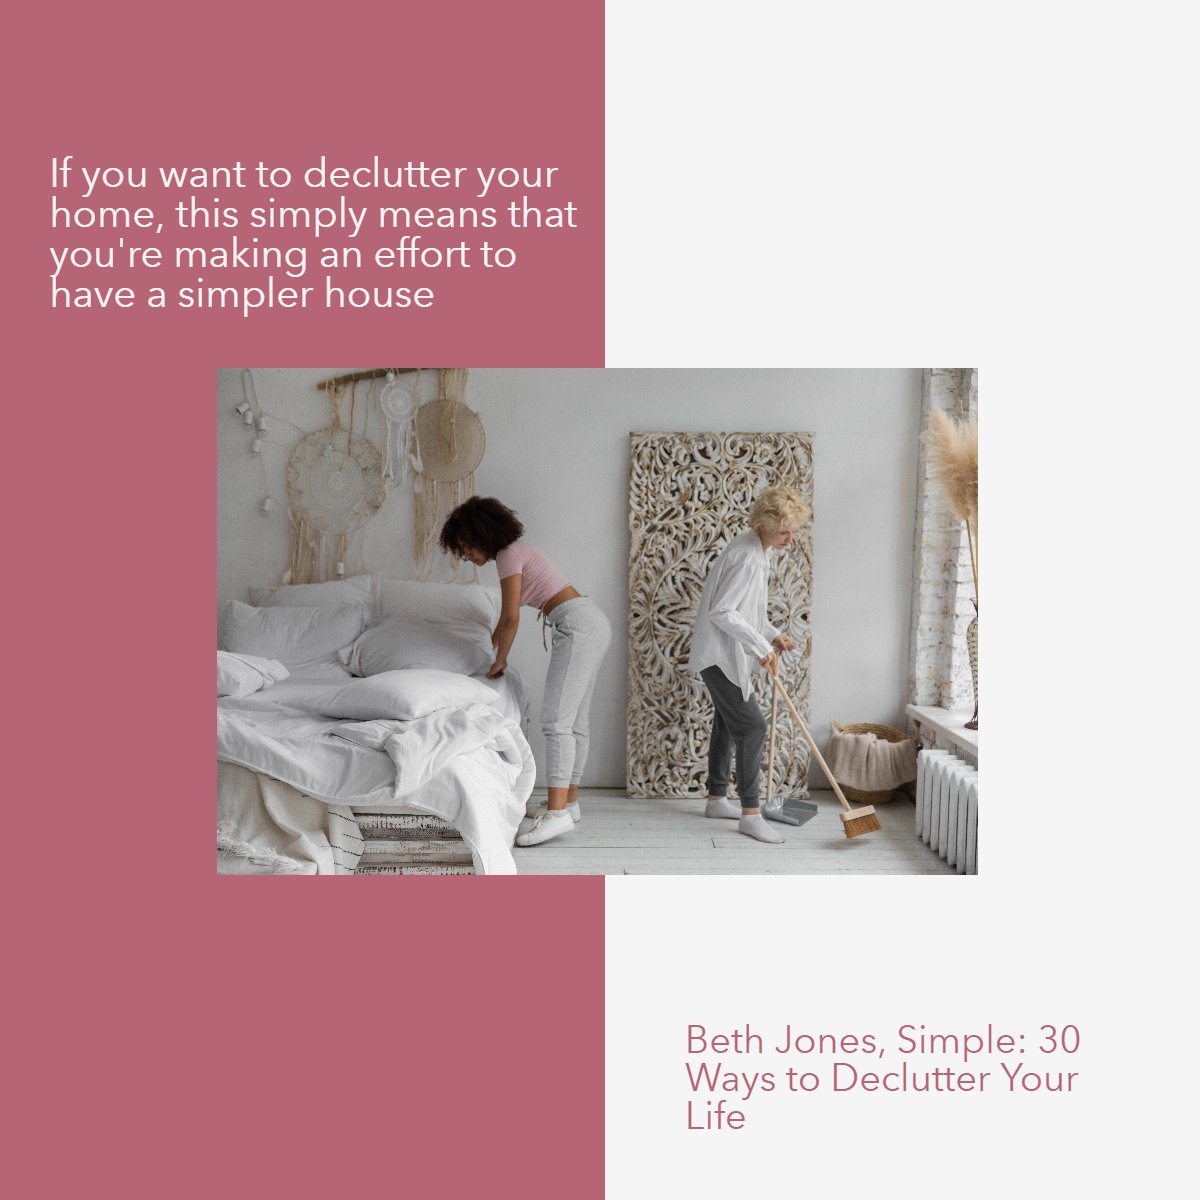 'If you want to declutter your home, this simply means that you're making an effort to have a simpler house.'
— Beth Jones 👌

#quoteoftheday     #quotestagram     #lifequotes     #realestate     #quotes     #homequotes
#teampalcic #swflrealestate #northport